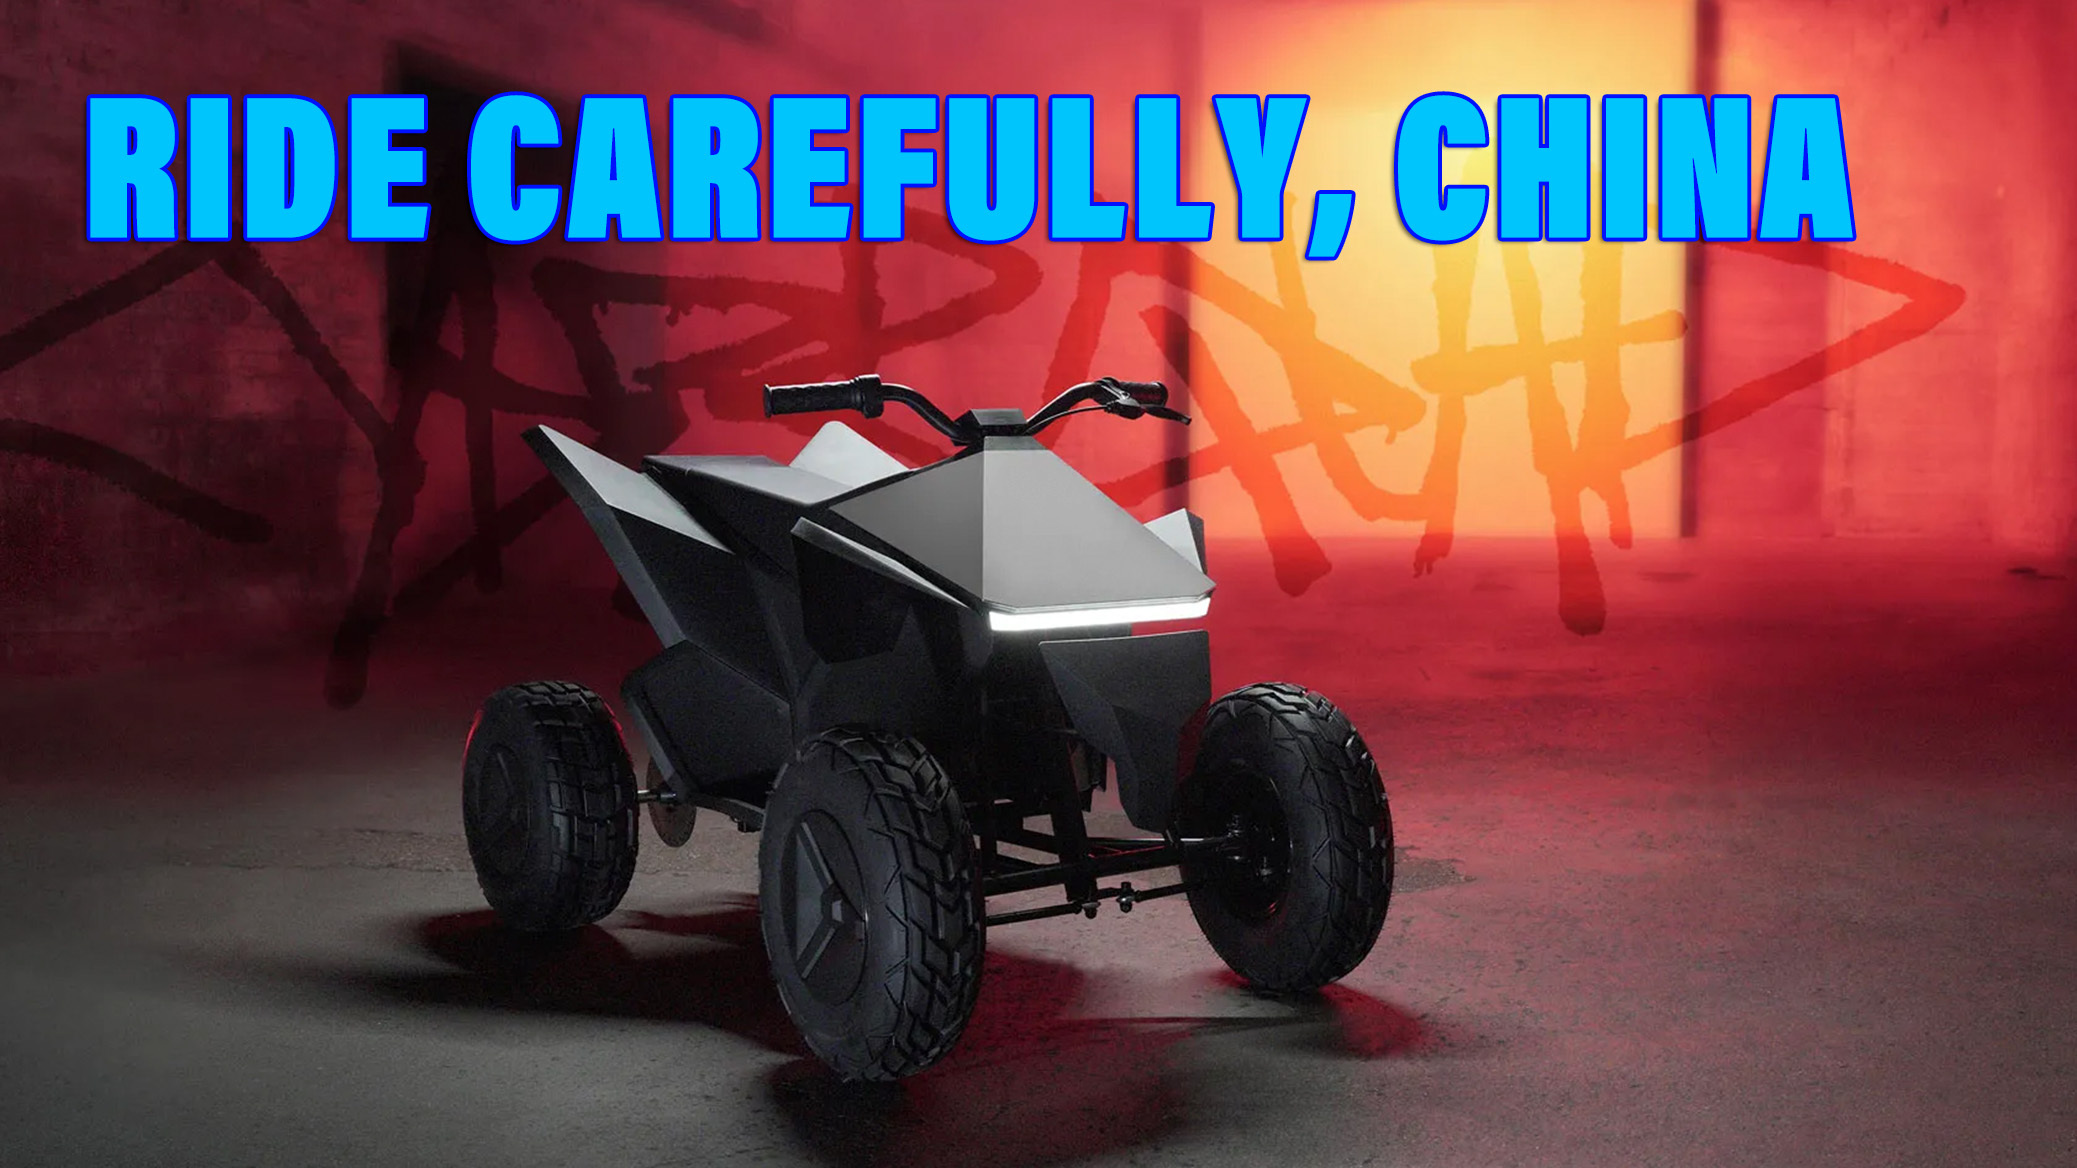 $1,671 Cyberquad That Was Banned In U.S. Is China’s New Entry-Degree Tesla ...